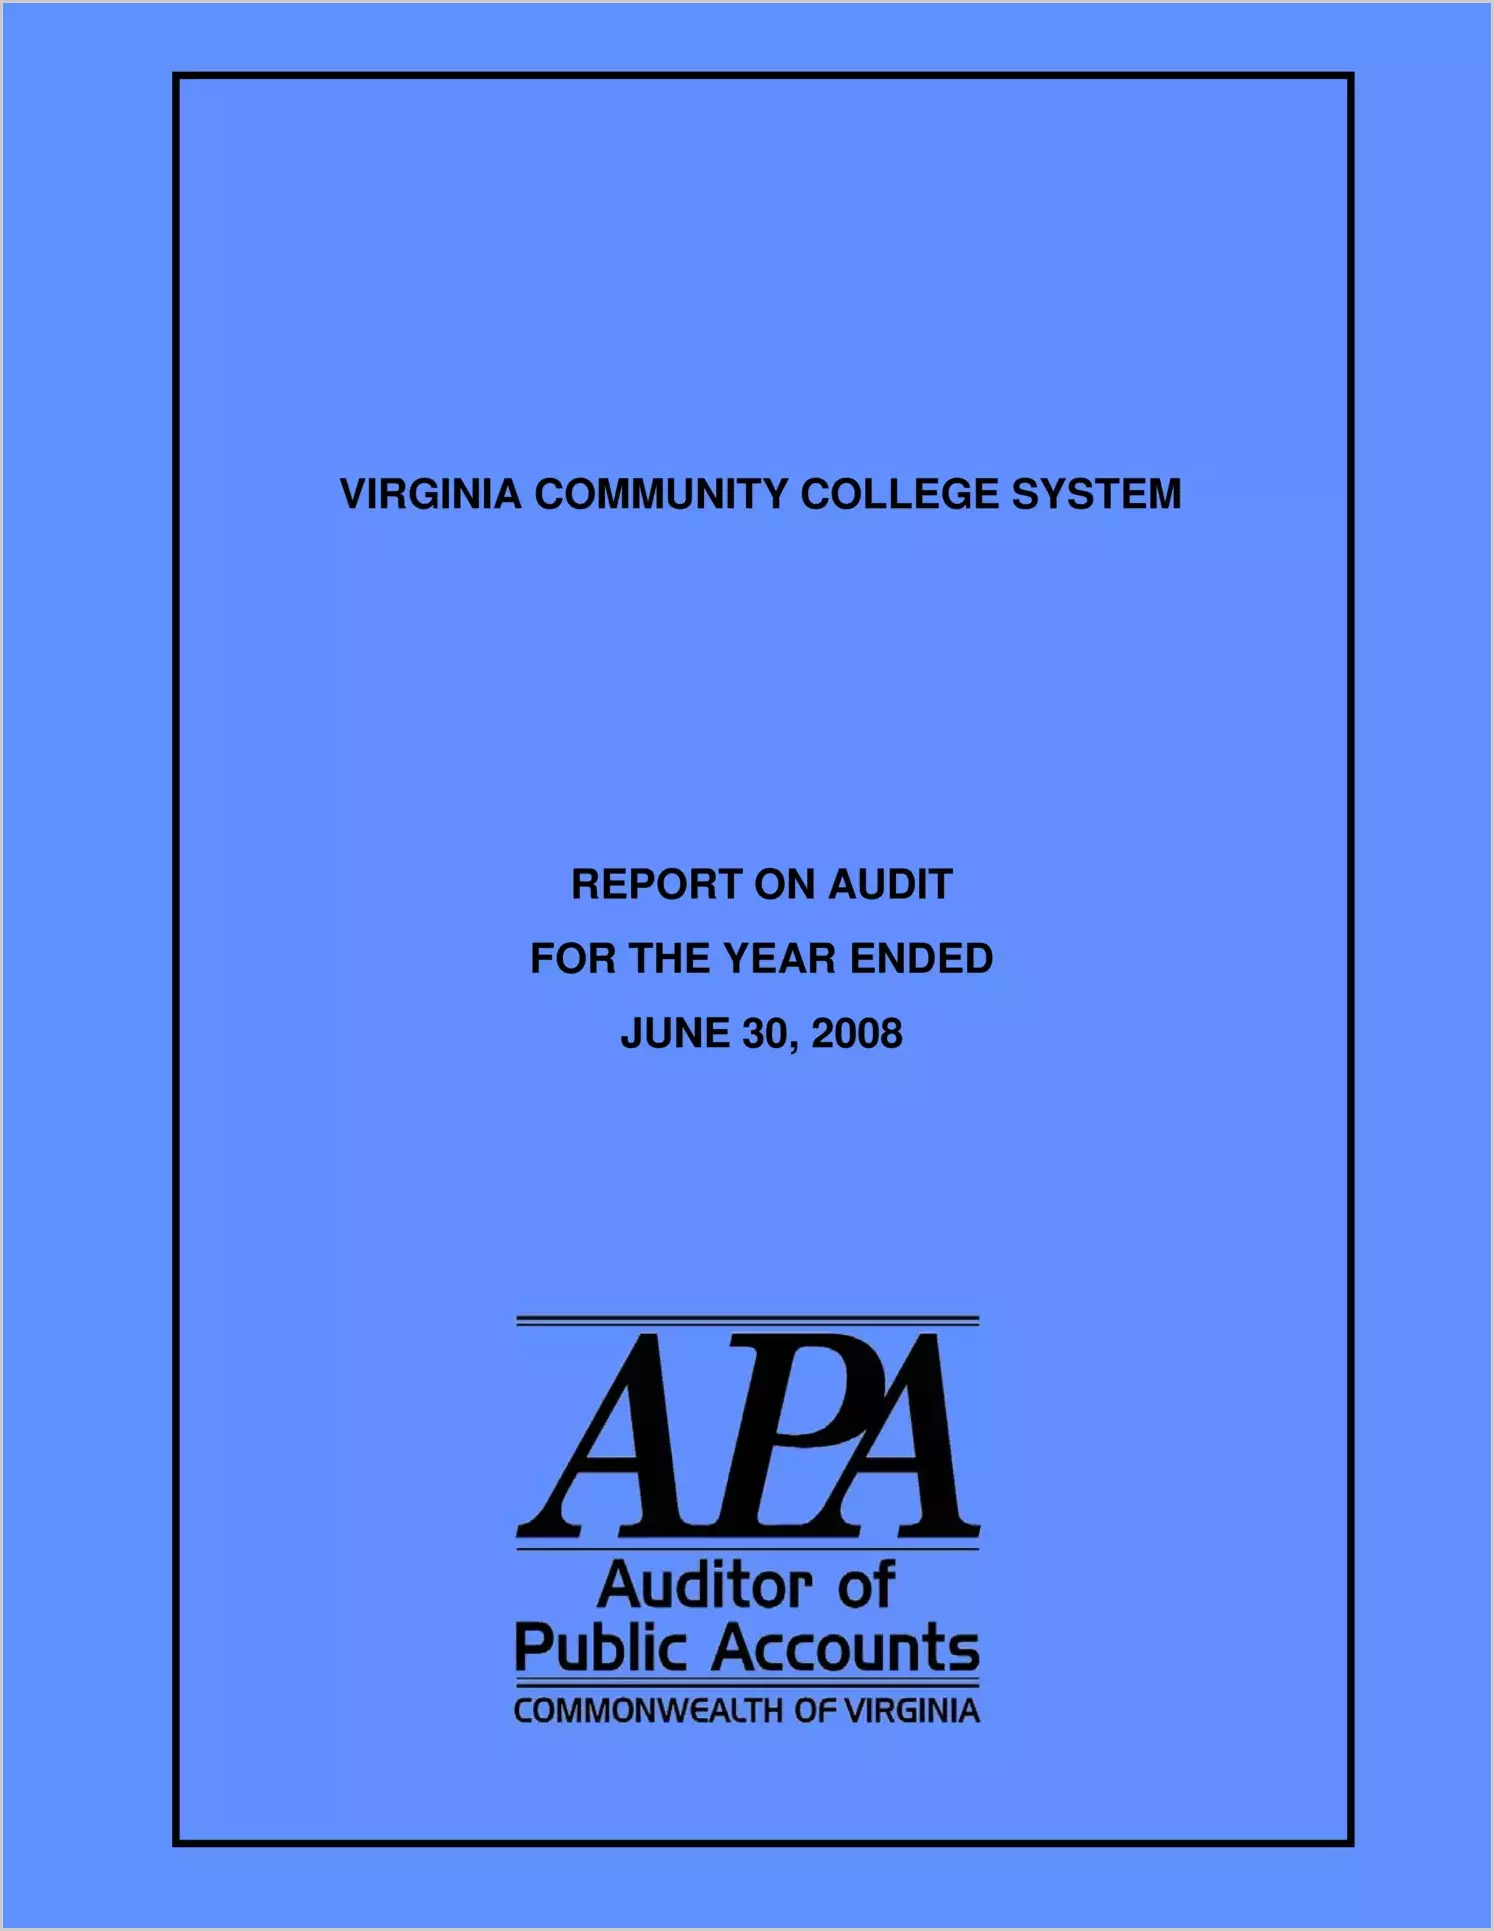 Virginia Community College System report on audit for the year ended June 30, 2008